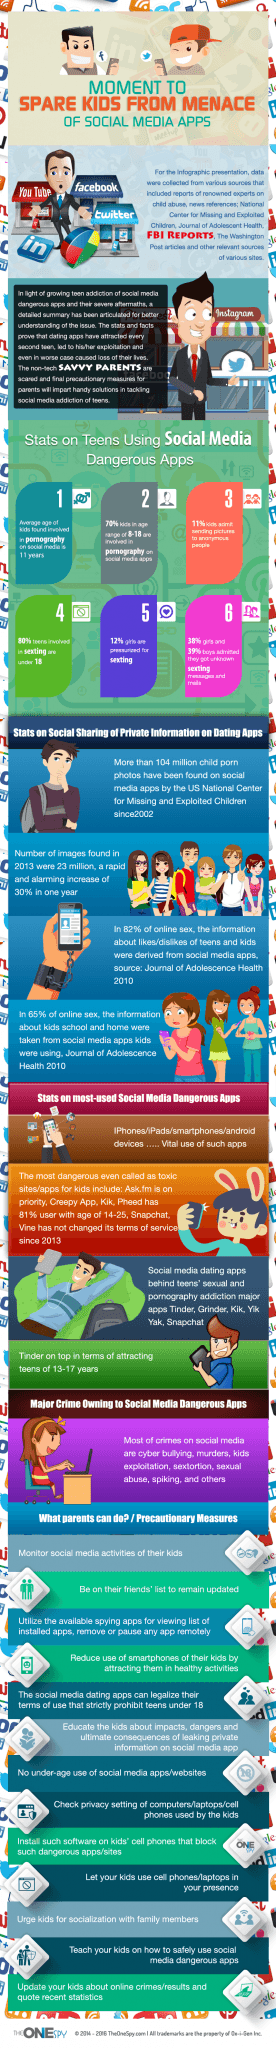 how-to-protect-teens-social-media-apps-dangers-infographic1